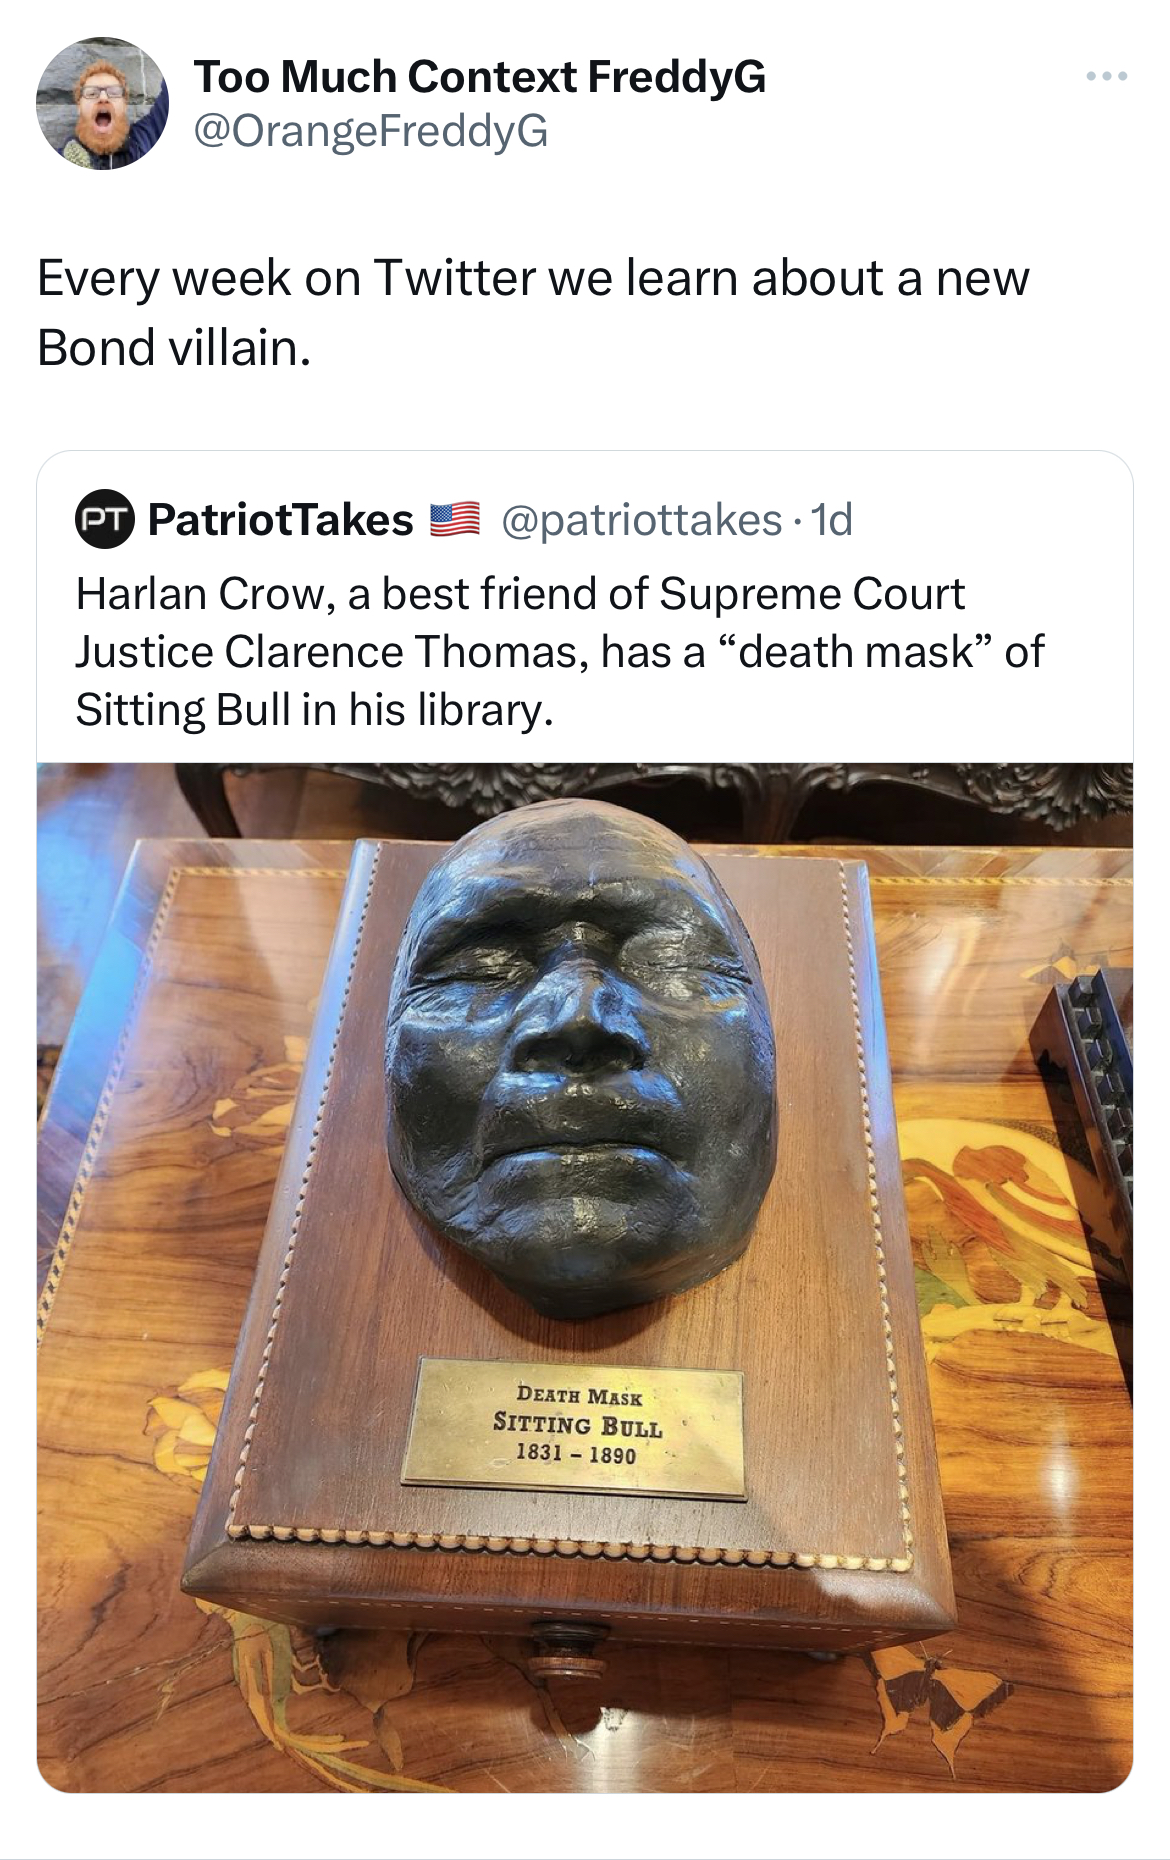 savage tweets - sculpture - Too Much Context FreddyG Every week on Twitter we learn about a new Bond villain. PatriotTakes Harlan Crow, a best friend of Supreme Court Justice Clarence Thomas, has a "death mask" of Sitting Bull in his library. Deat Ma Sitt